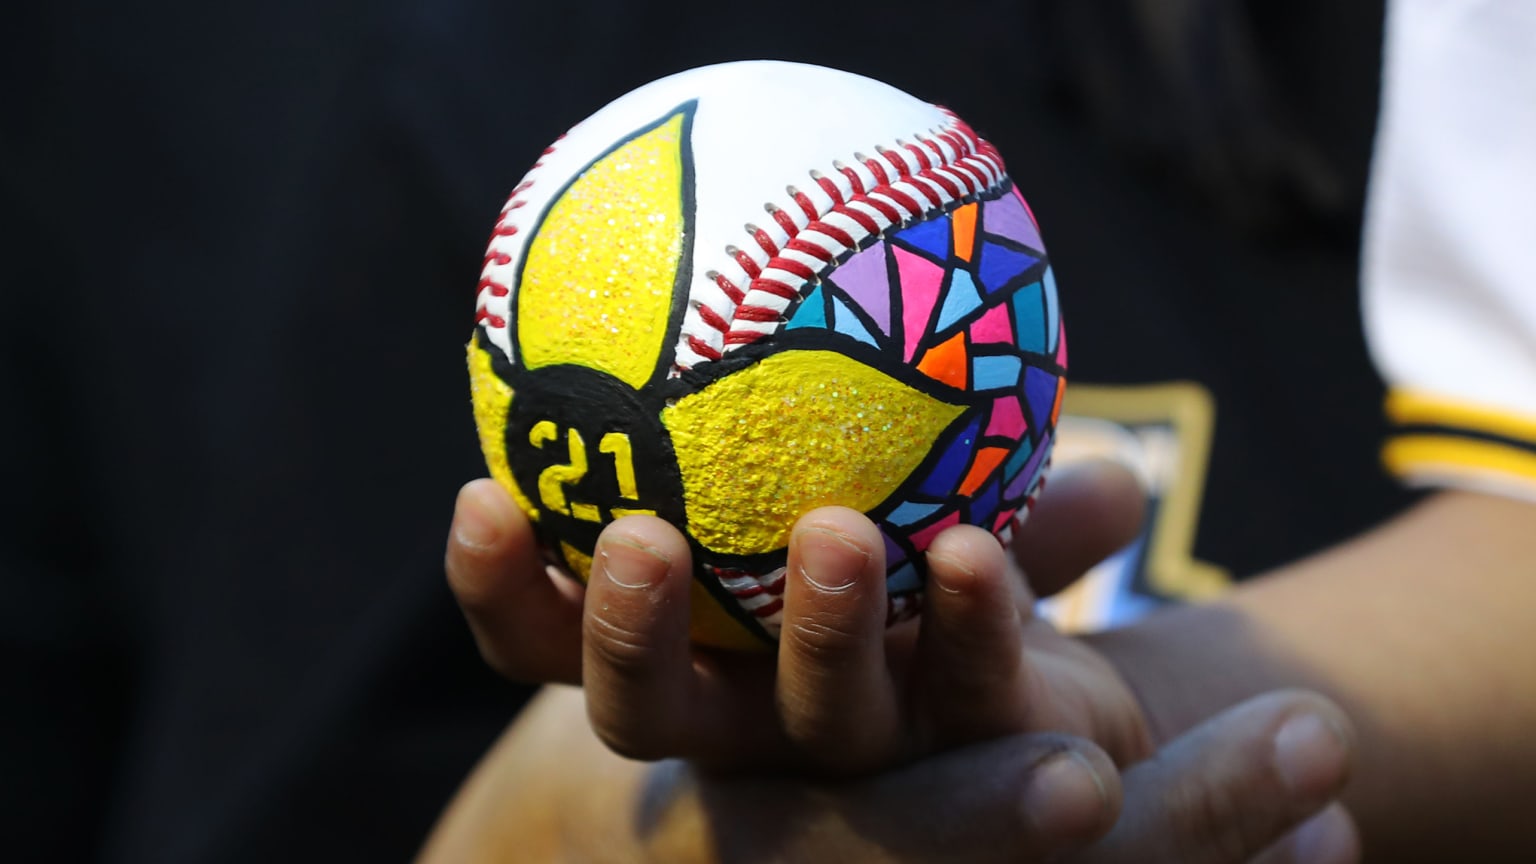 A baseball with a yellow flower painted on it and the number 21 in the center of it. To the right of the flower, multi-colored shapes resemble stained glass